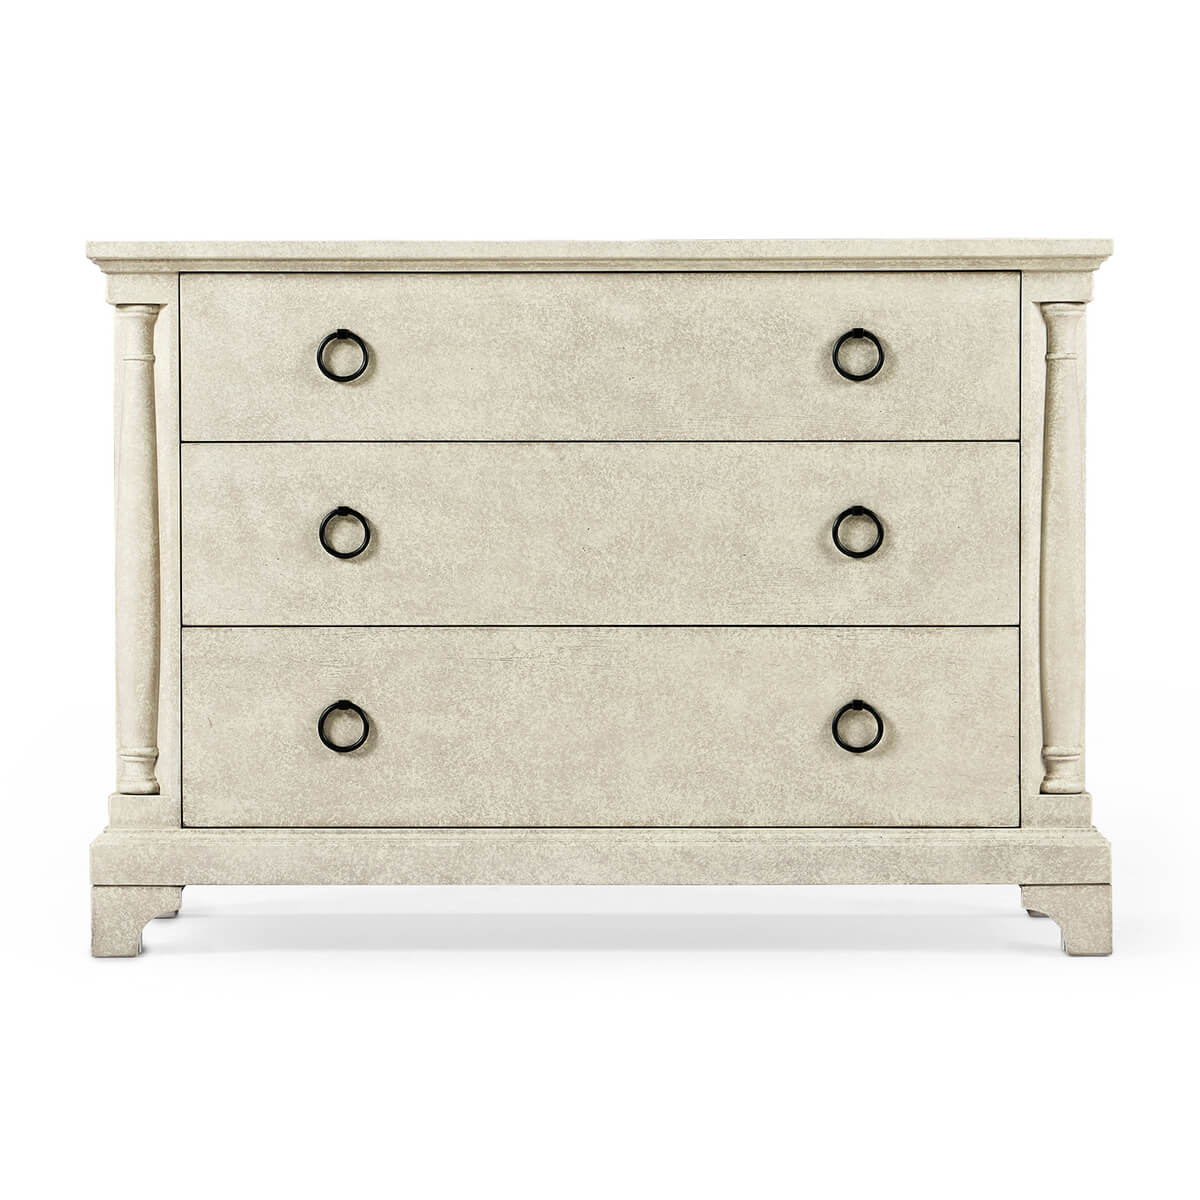 French Country Chest of Drawers - Whitewash - English Georgian America